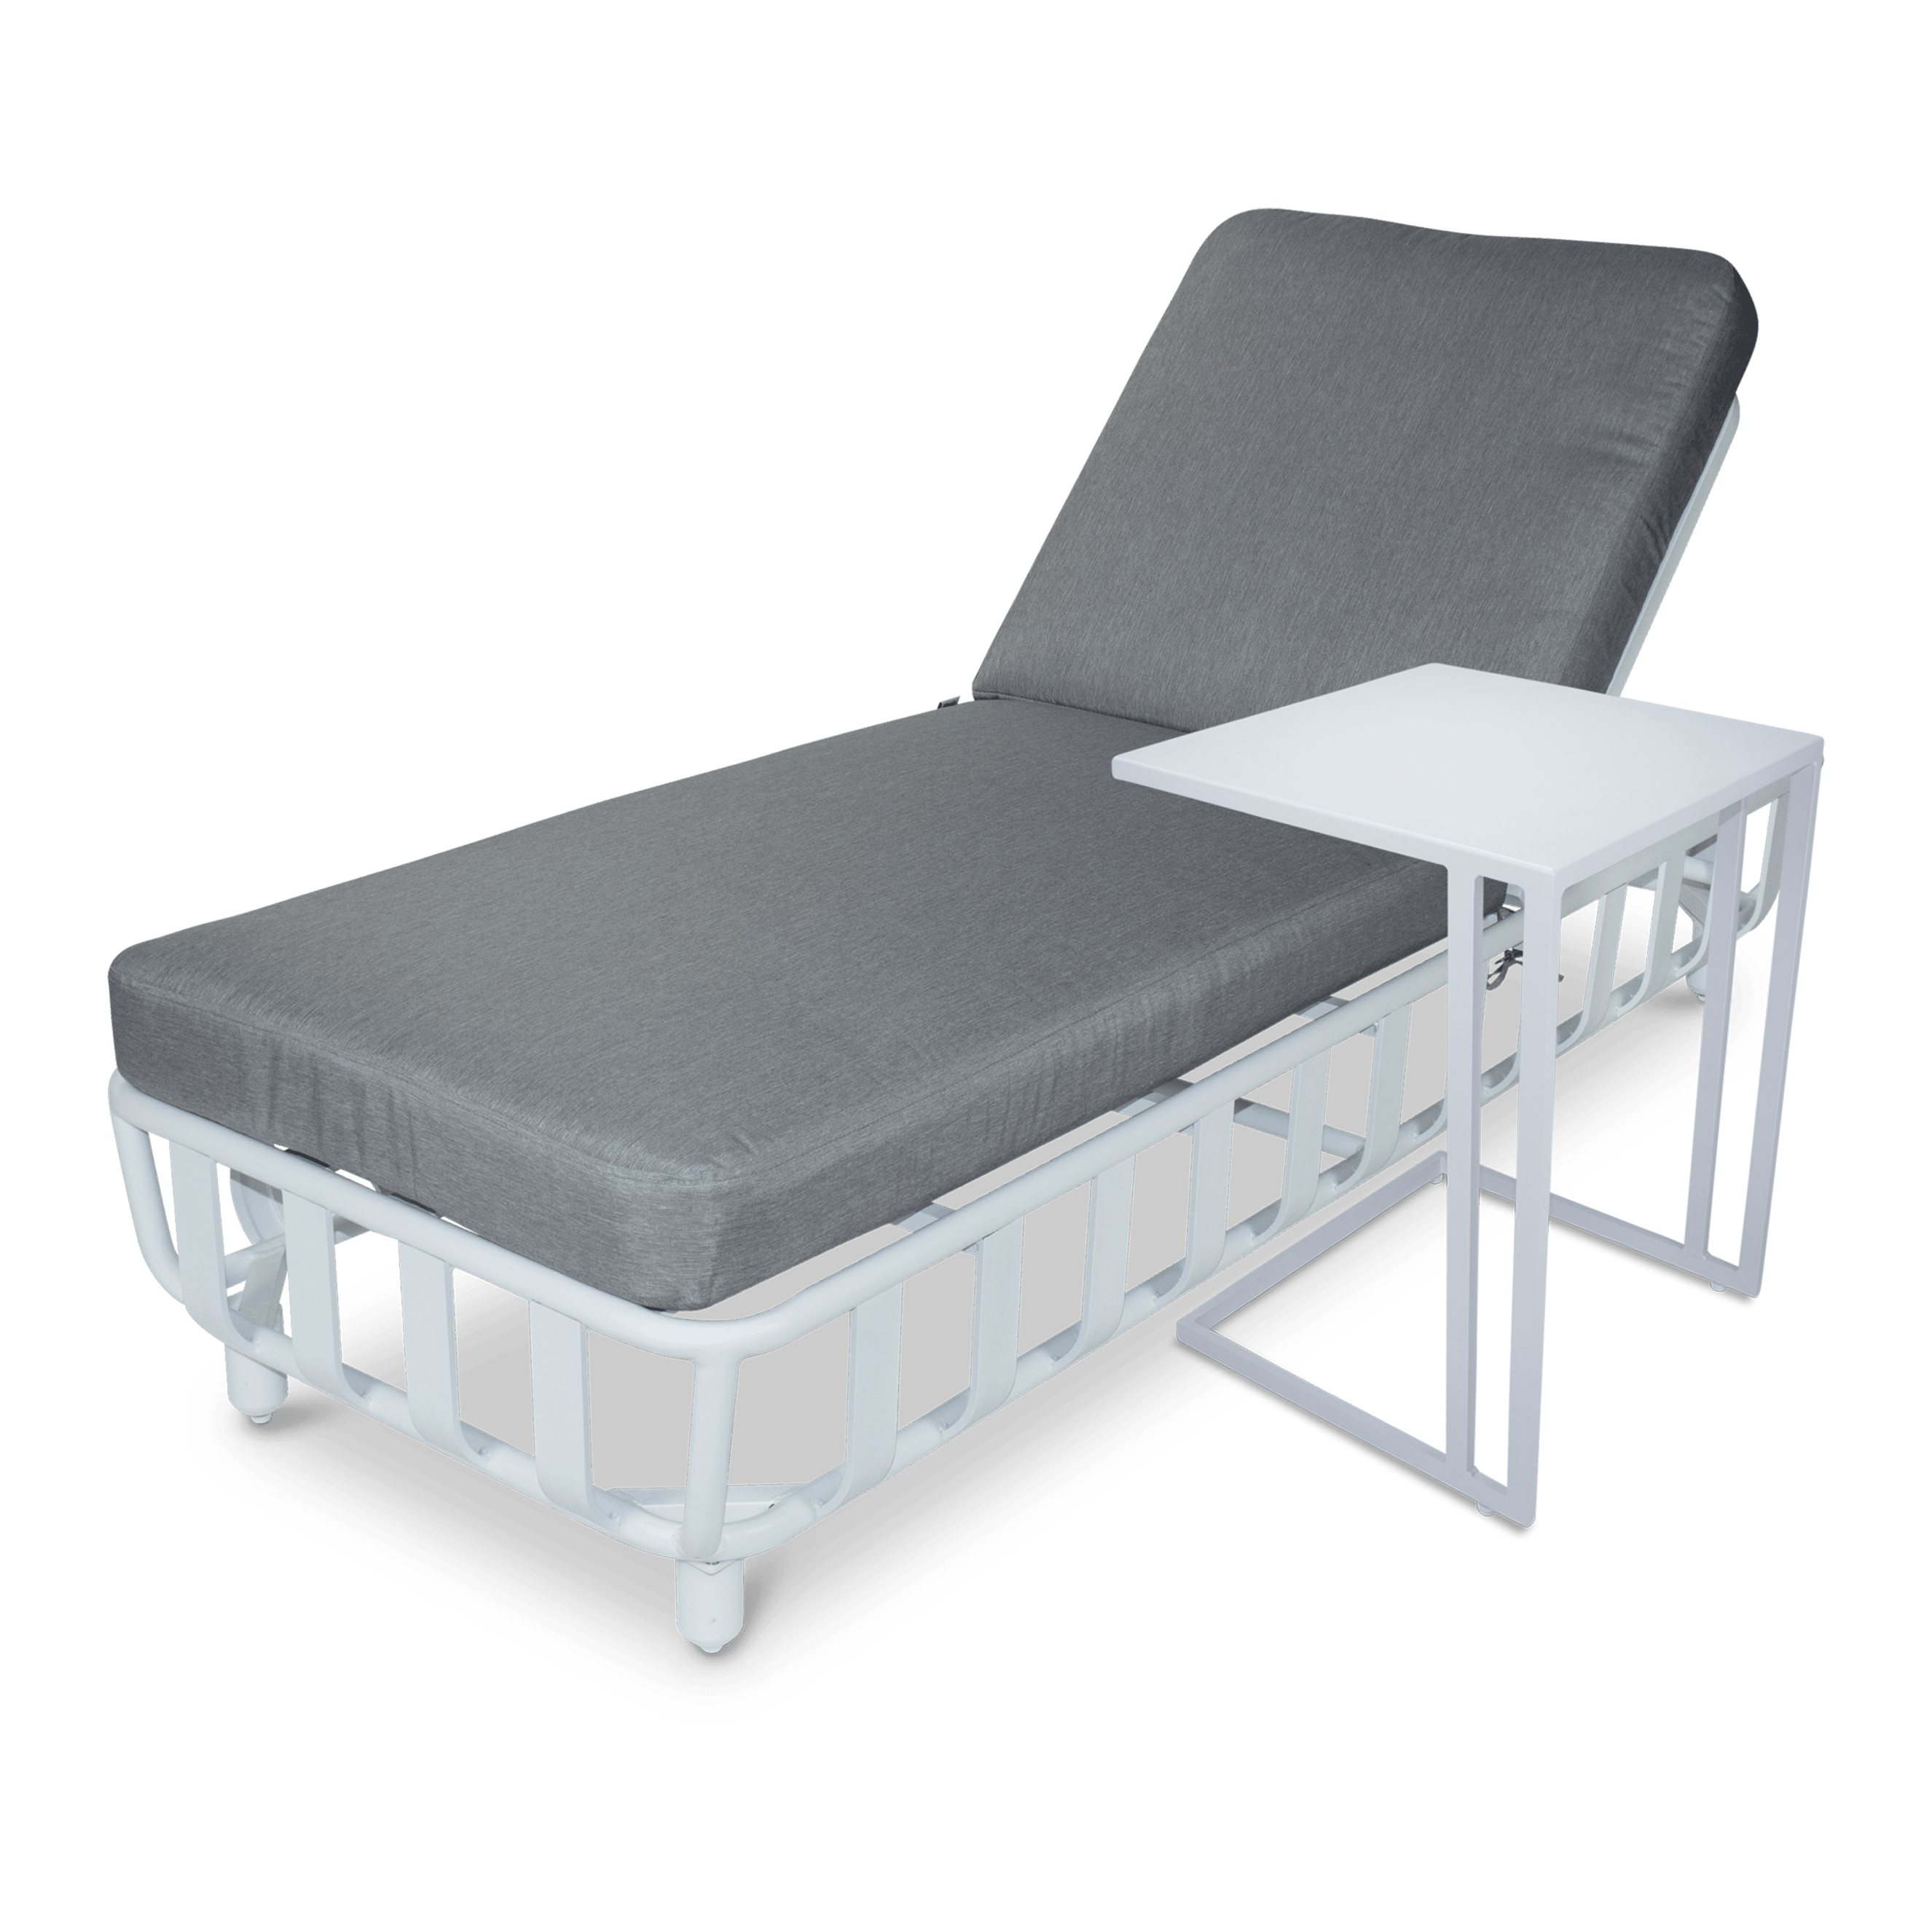 Sorrento Sunlounger & Mykonos Large Side Table in Arctic White with Spuncrylic Stone Grey Cushions